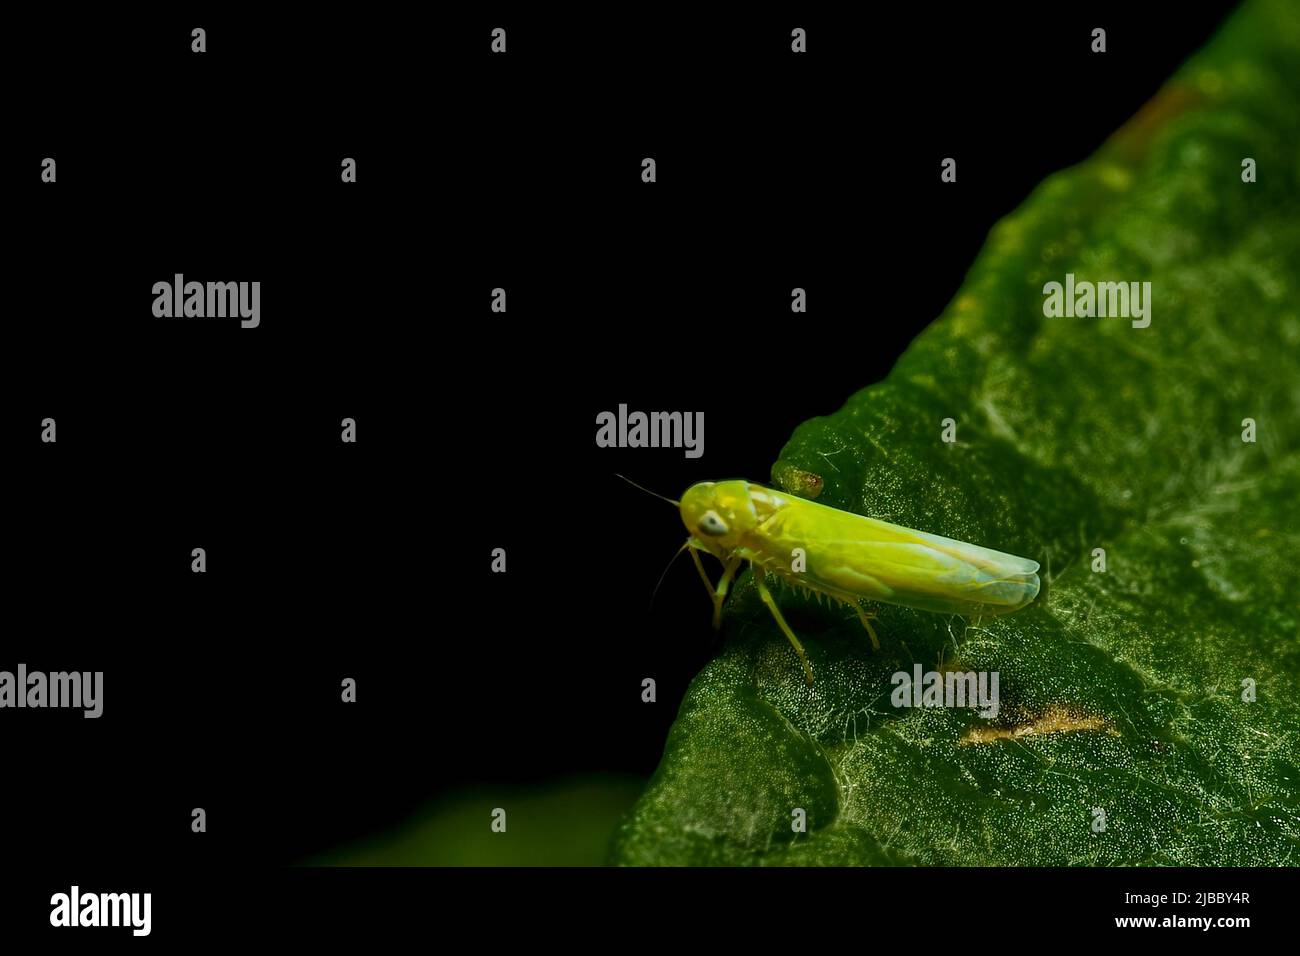 Green vine cicada (Empoasca vitis) on a leaf, with copy space, isolated, black background Stock Photo